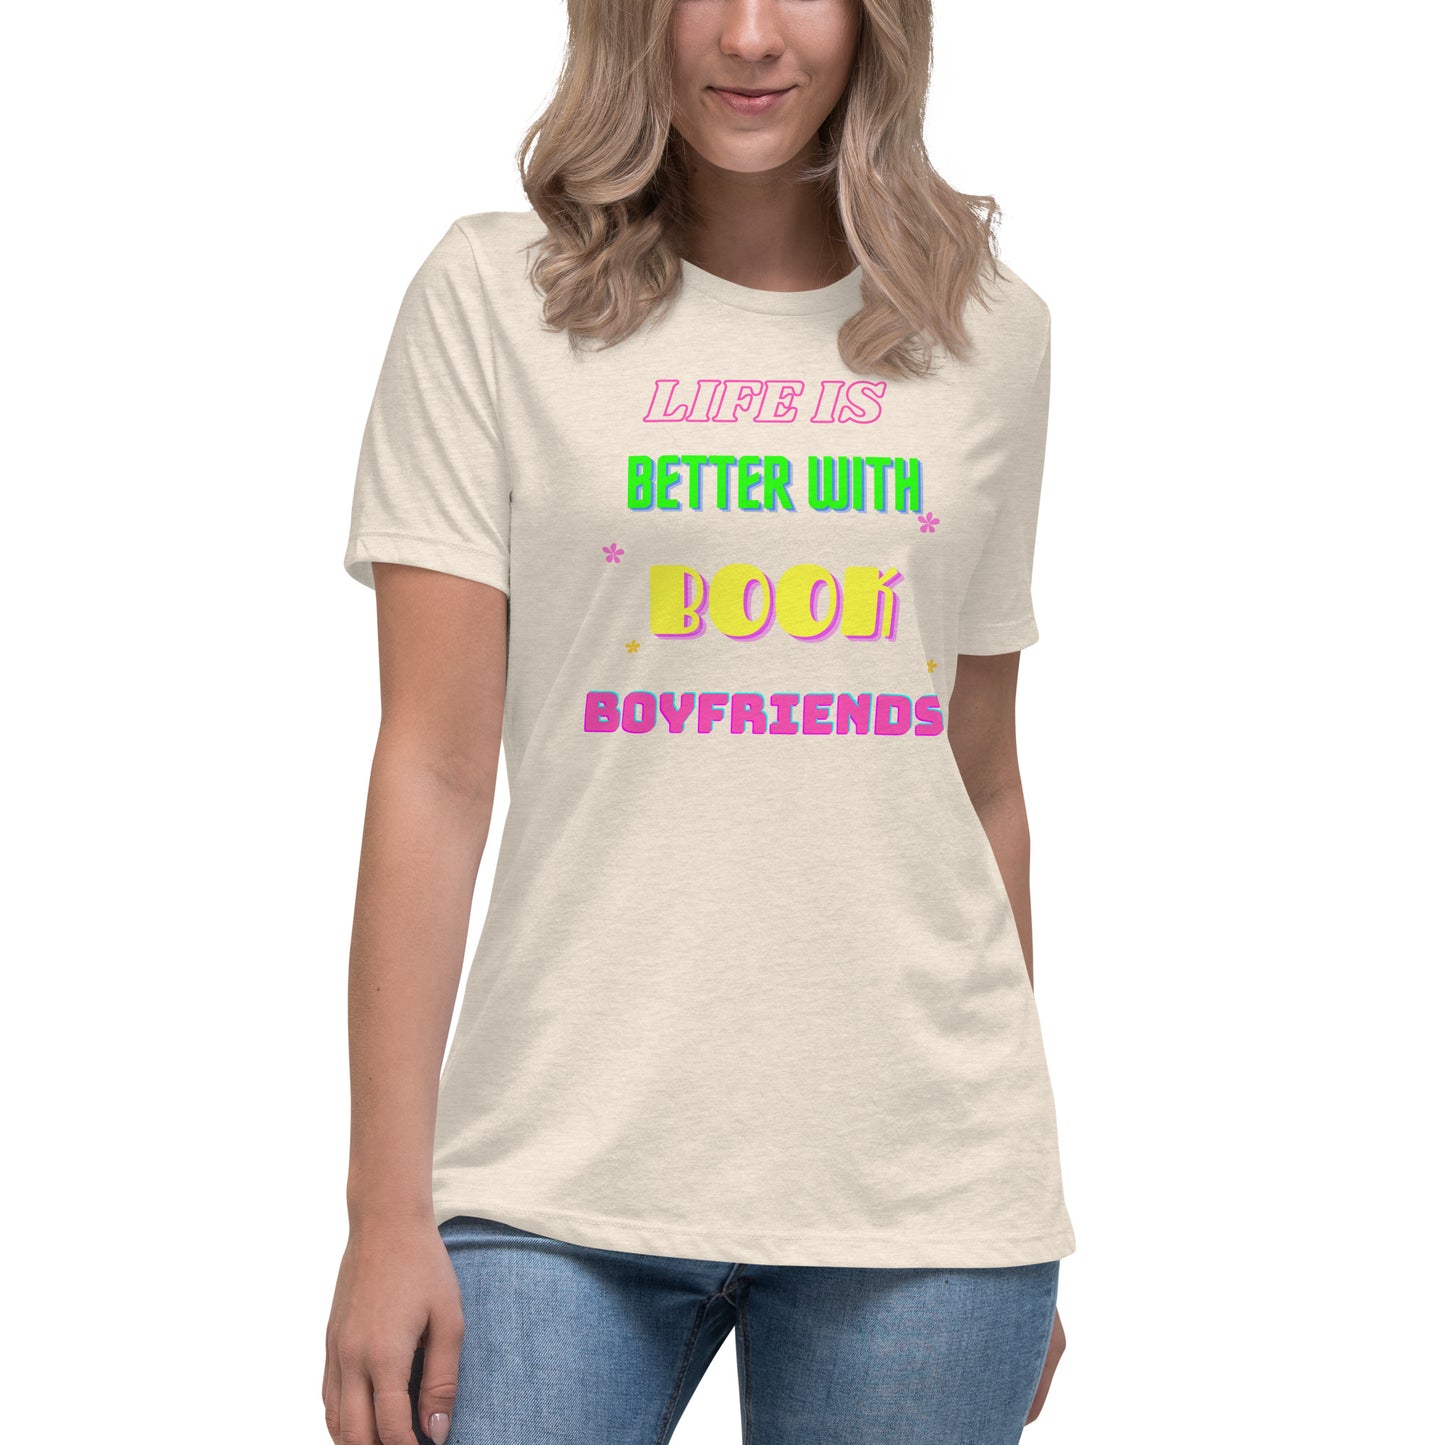 Women's Relaxed T-Shirt Life is better with book boyfriends